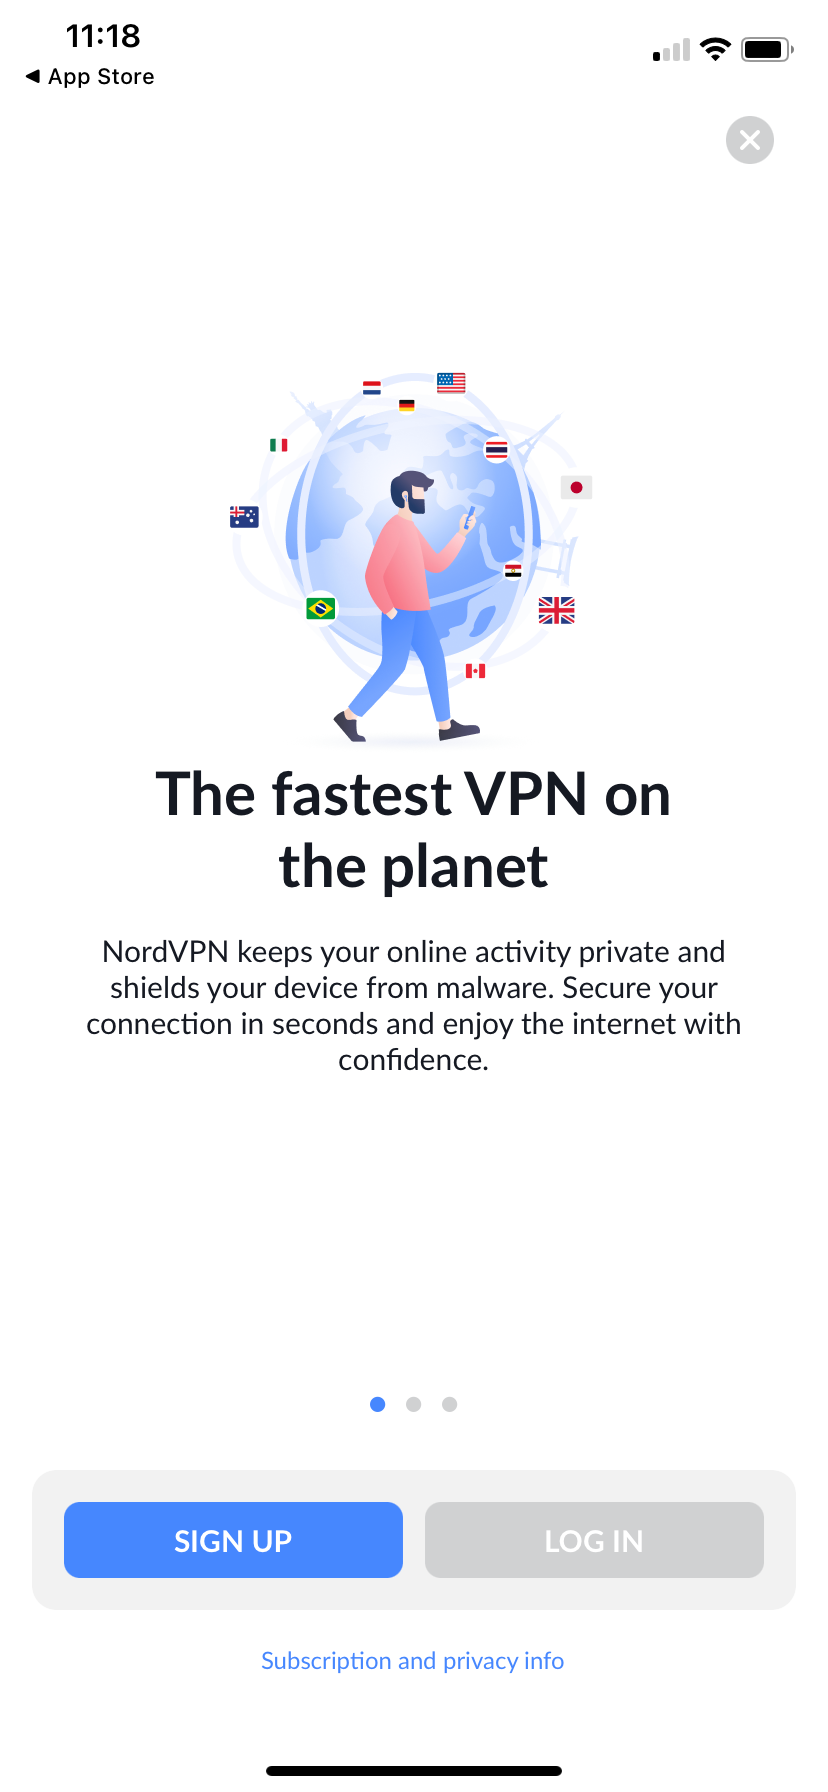 How to add a VPN to an iPhone